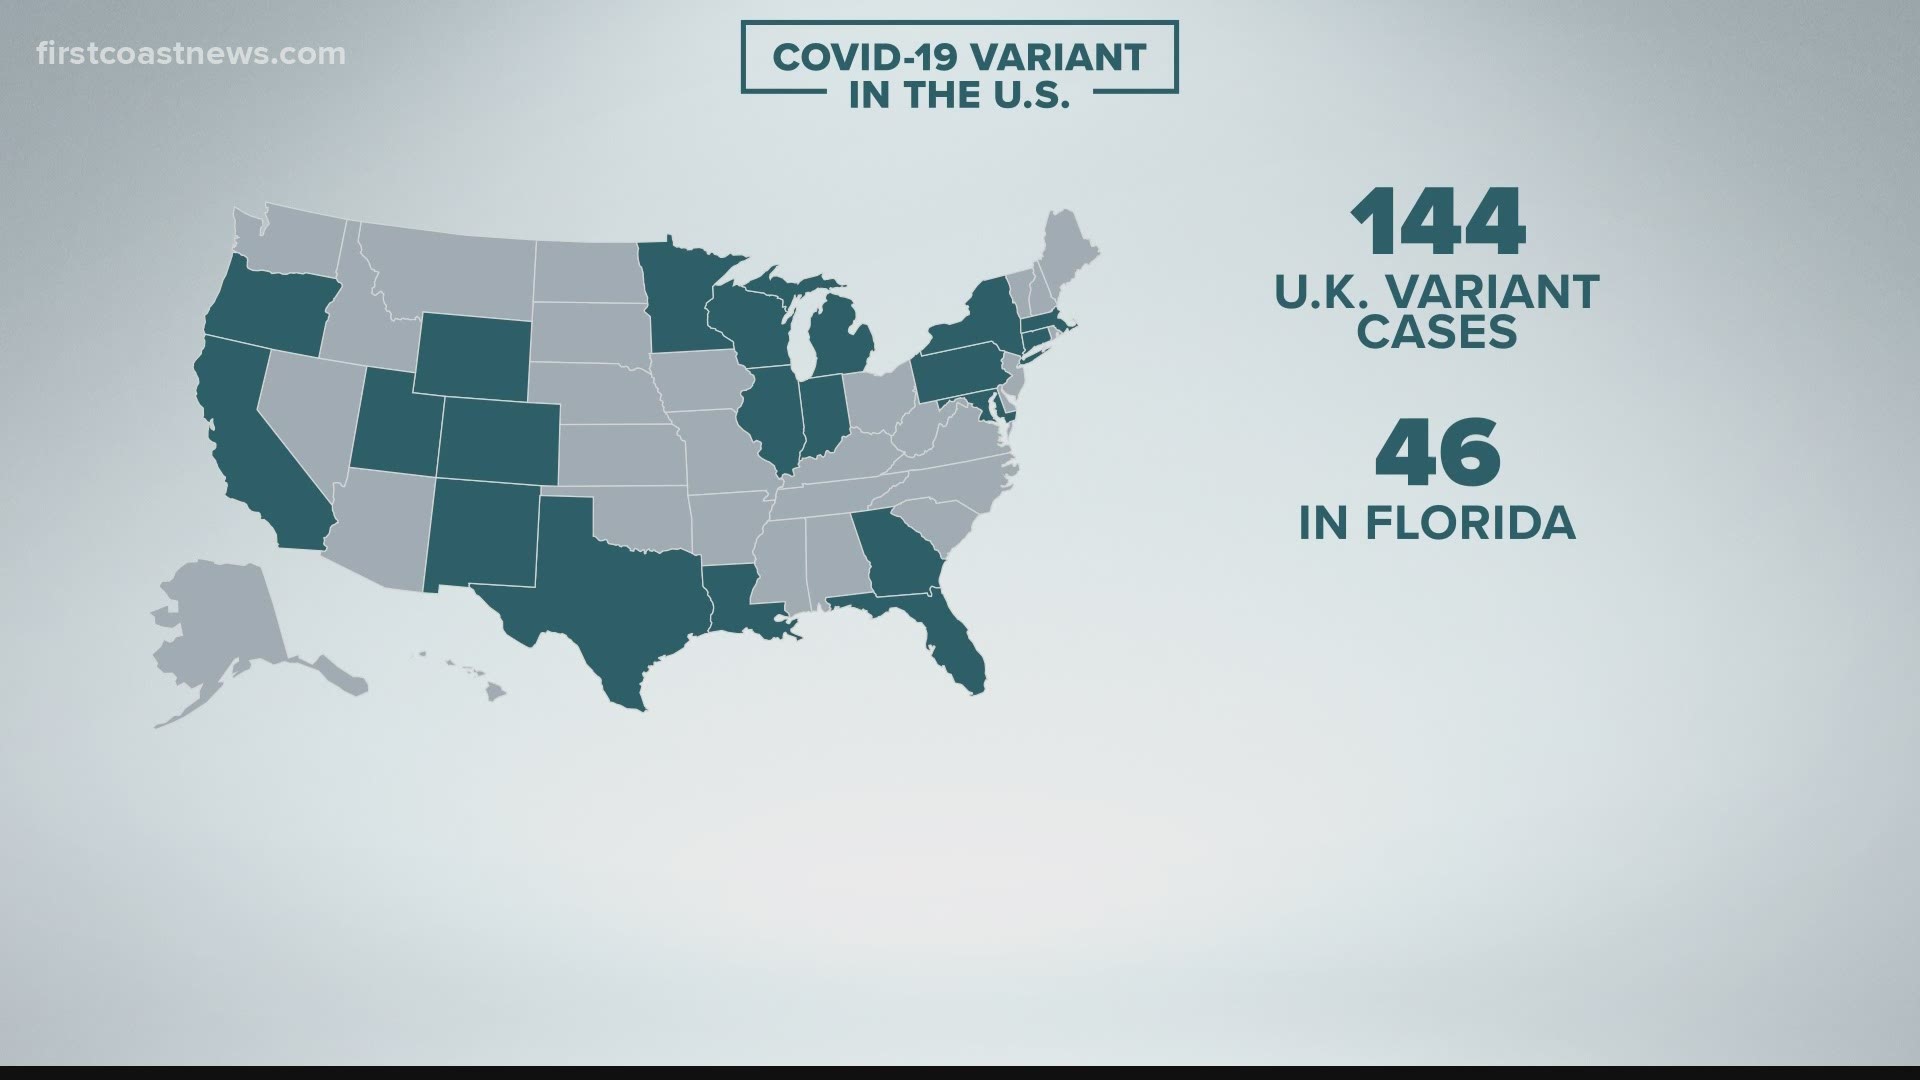 CDC: Florida has more UK COVID-19 variant cases than any other state